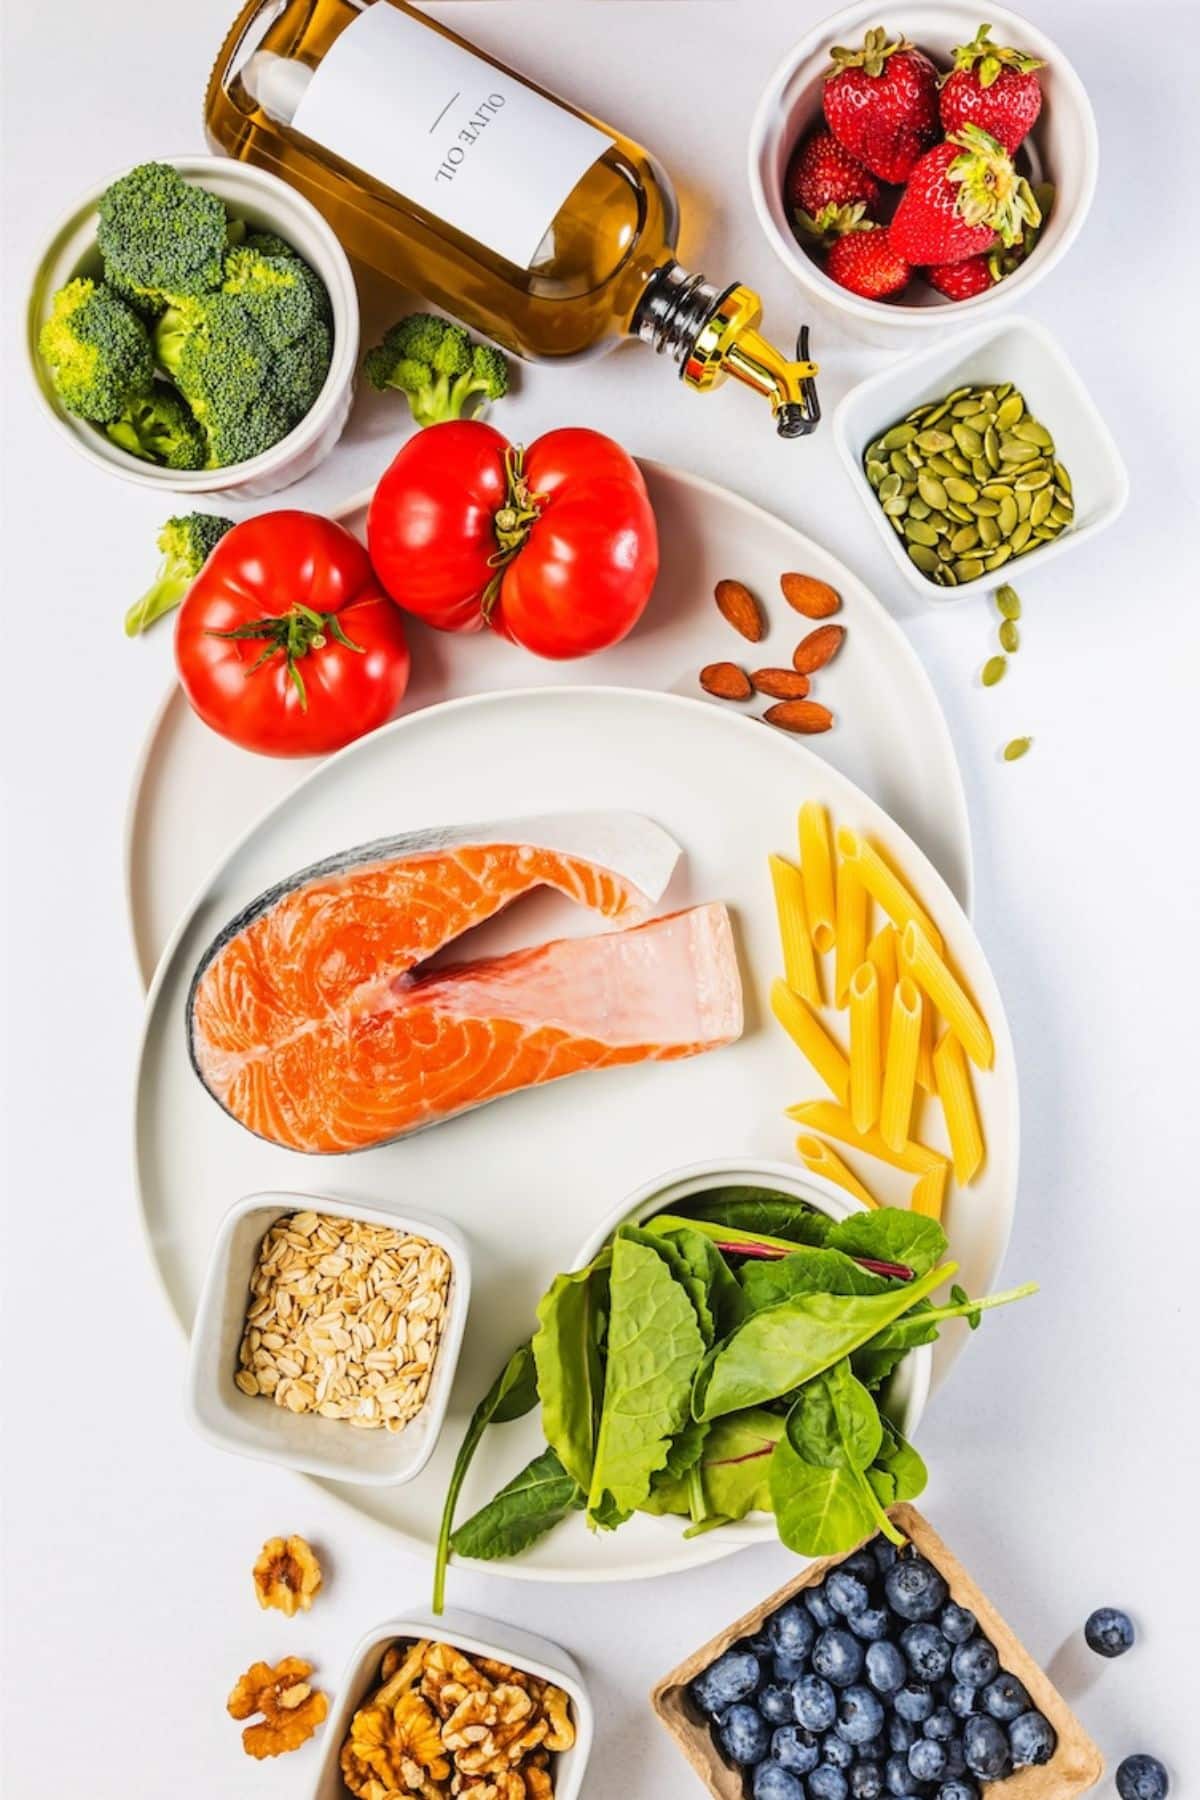 selection of anti inflammatory foods for pcos diet.